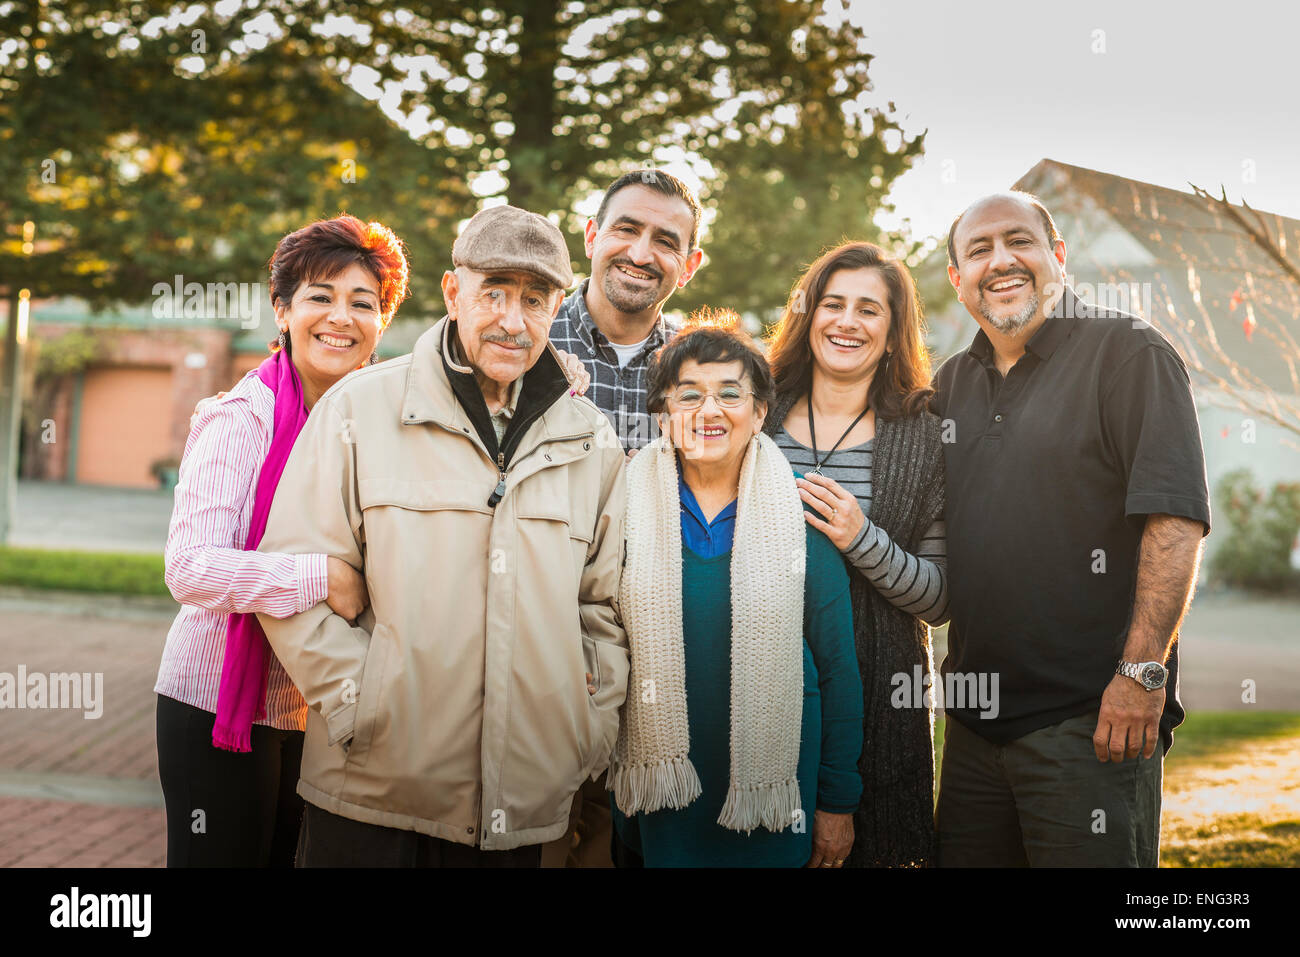 Multi-generation family smiling together outdoors Stock Photo